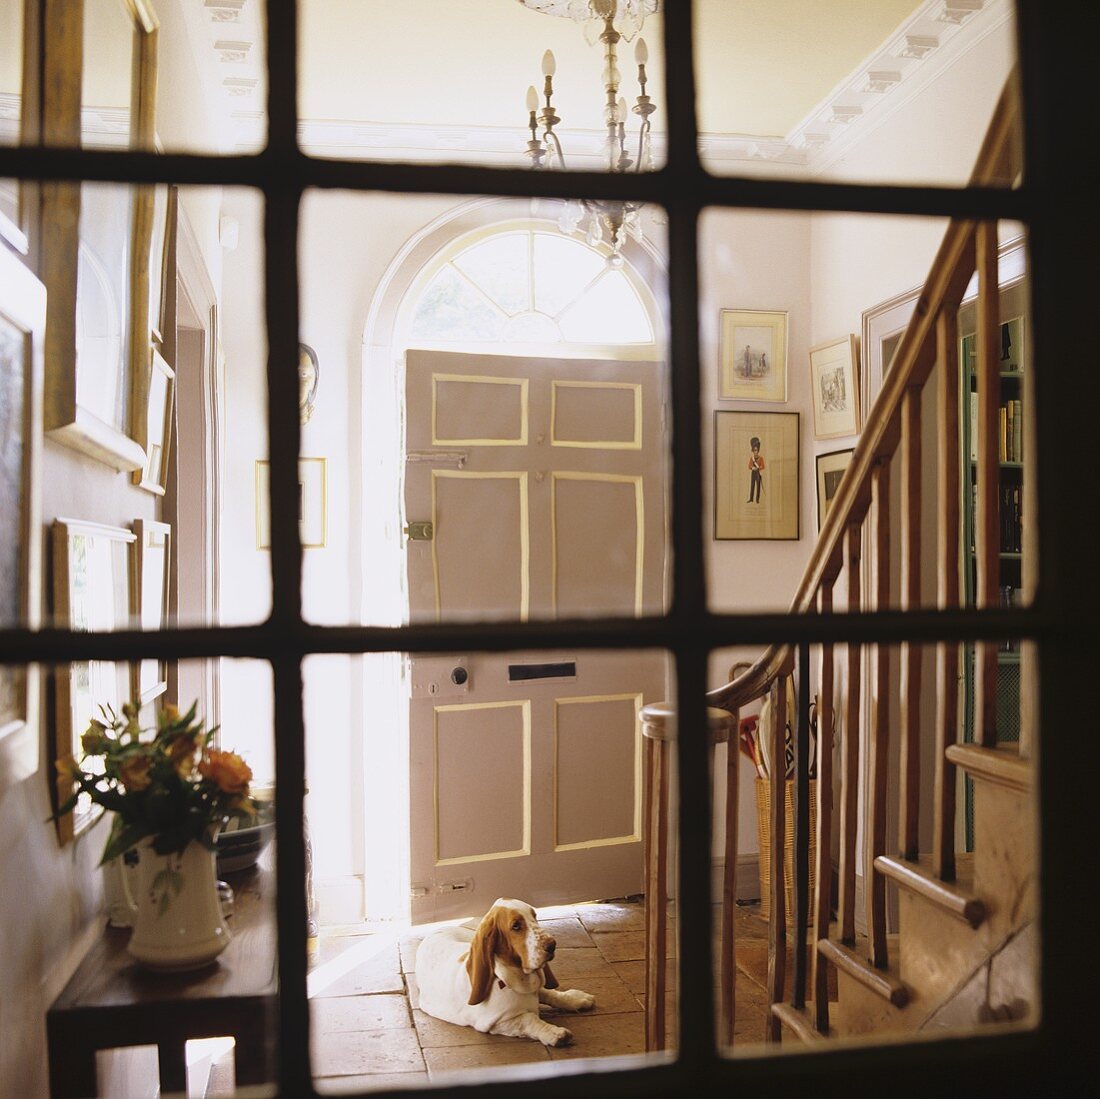 A view through an old transom window onto a front door with a ceiling light and a dog